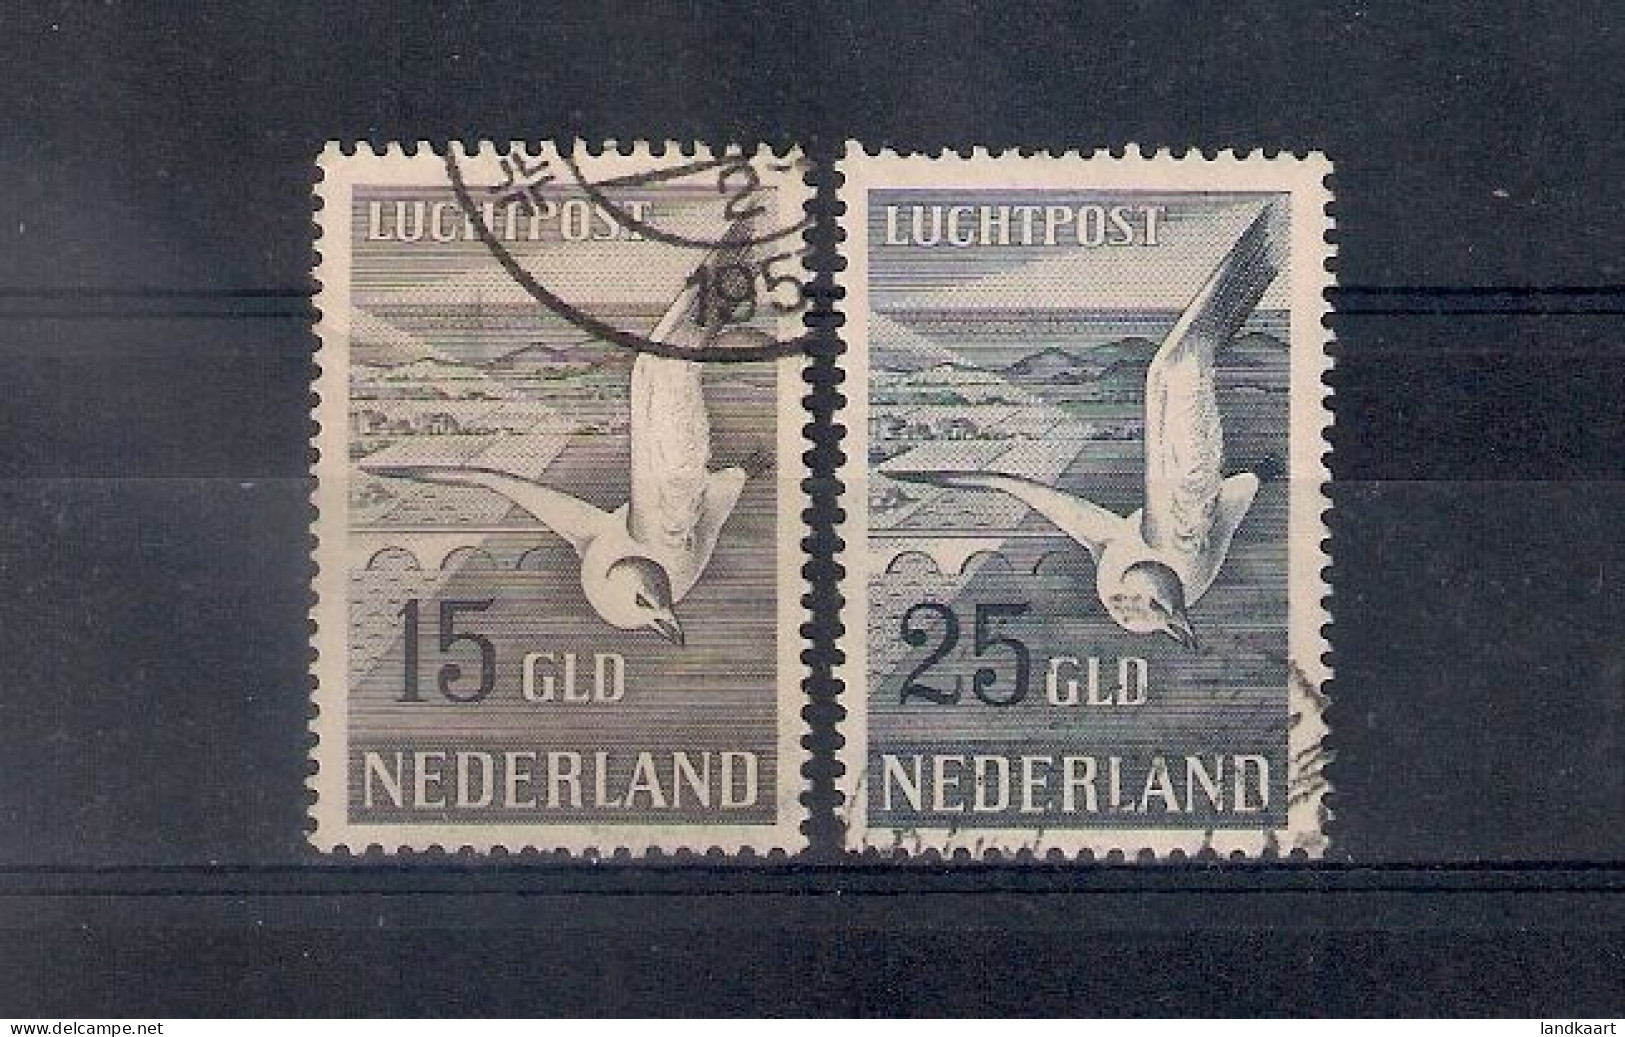 Netherlands 1951, NVPH LP Nr 12-13, Used - Airmail